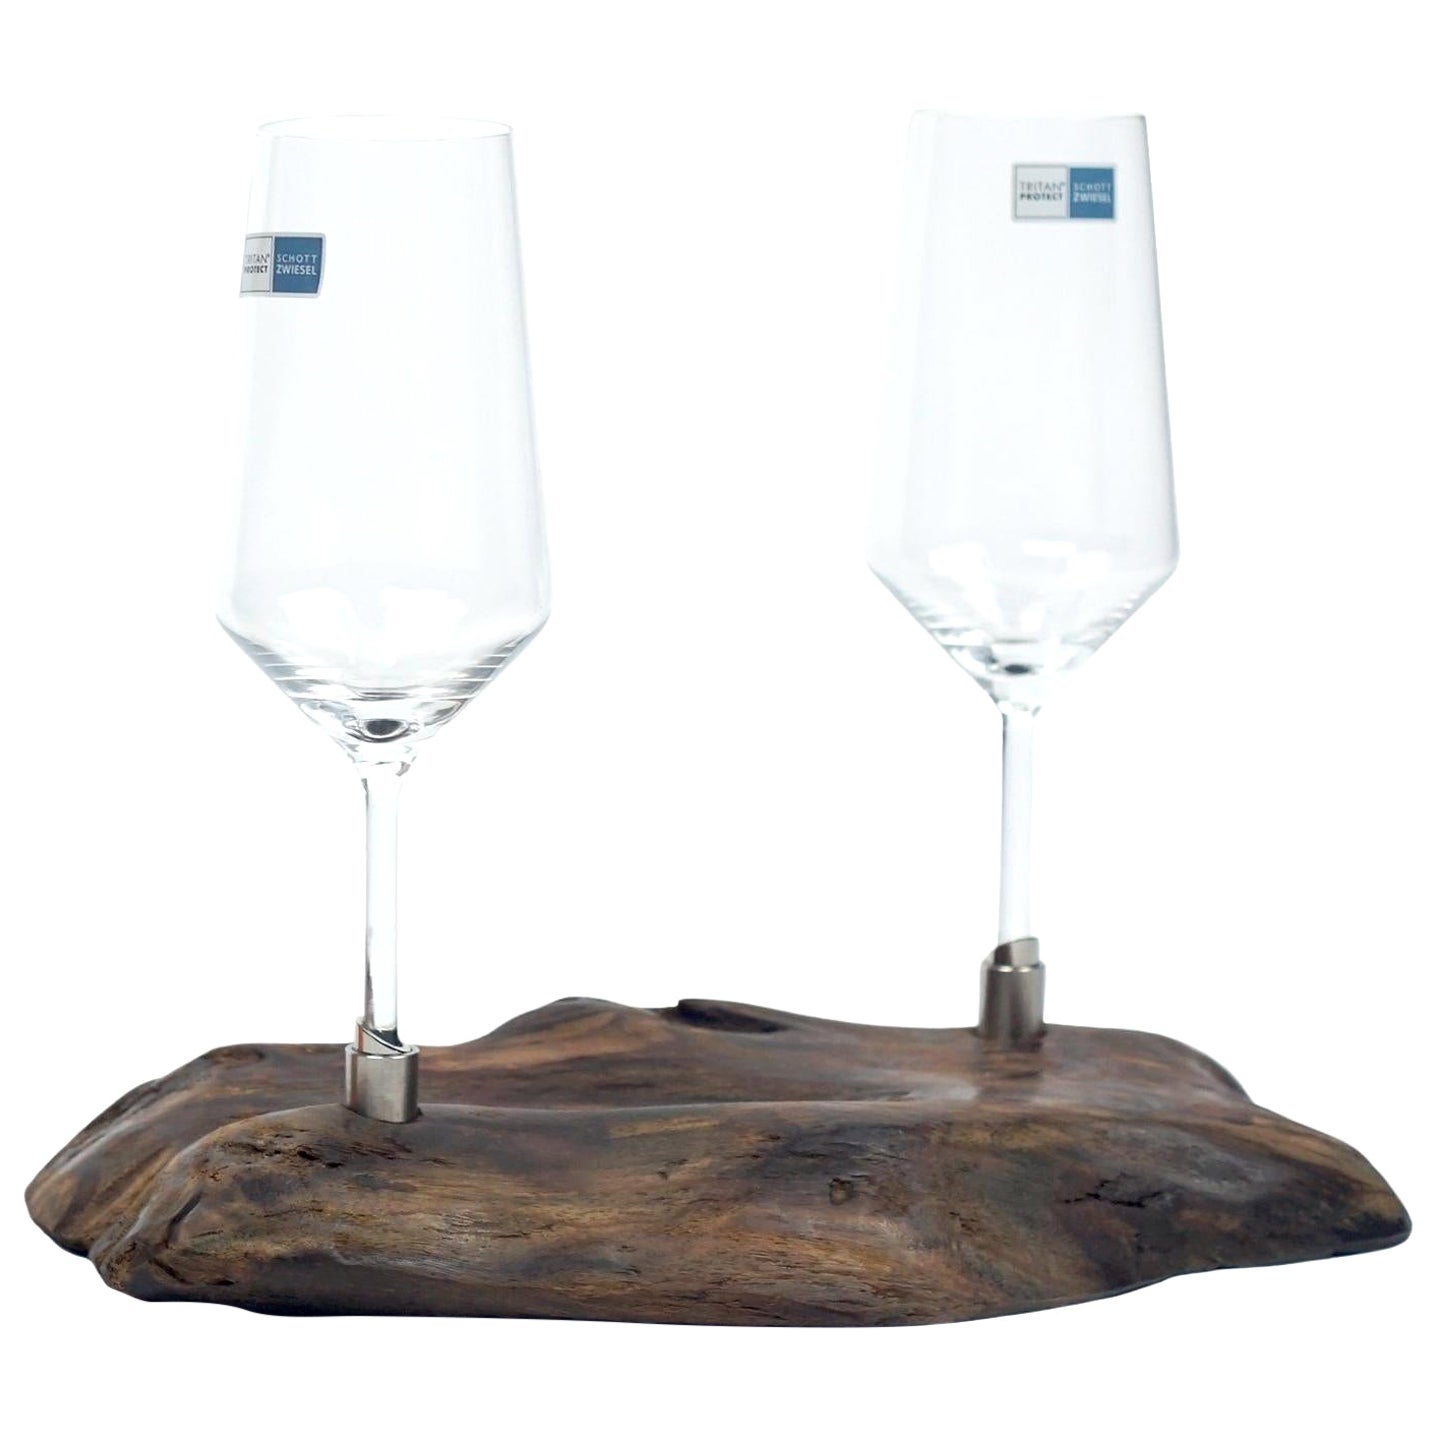 High Quality Glasses on Sonokiling Wood For Sale